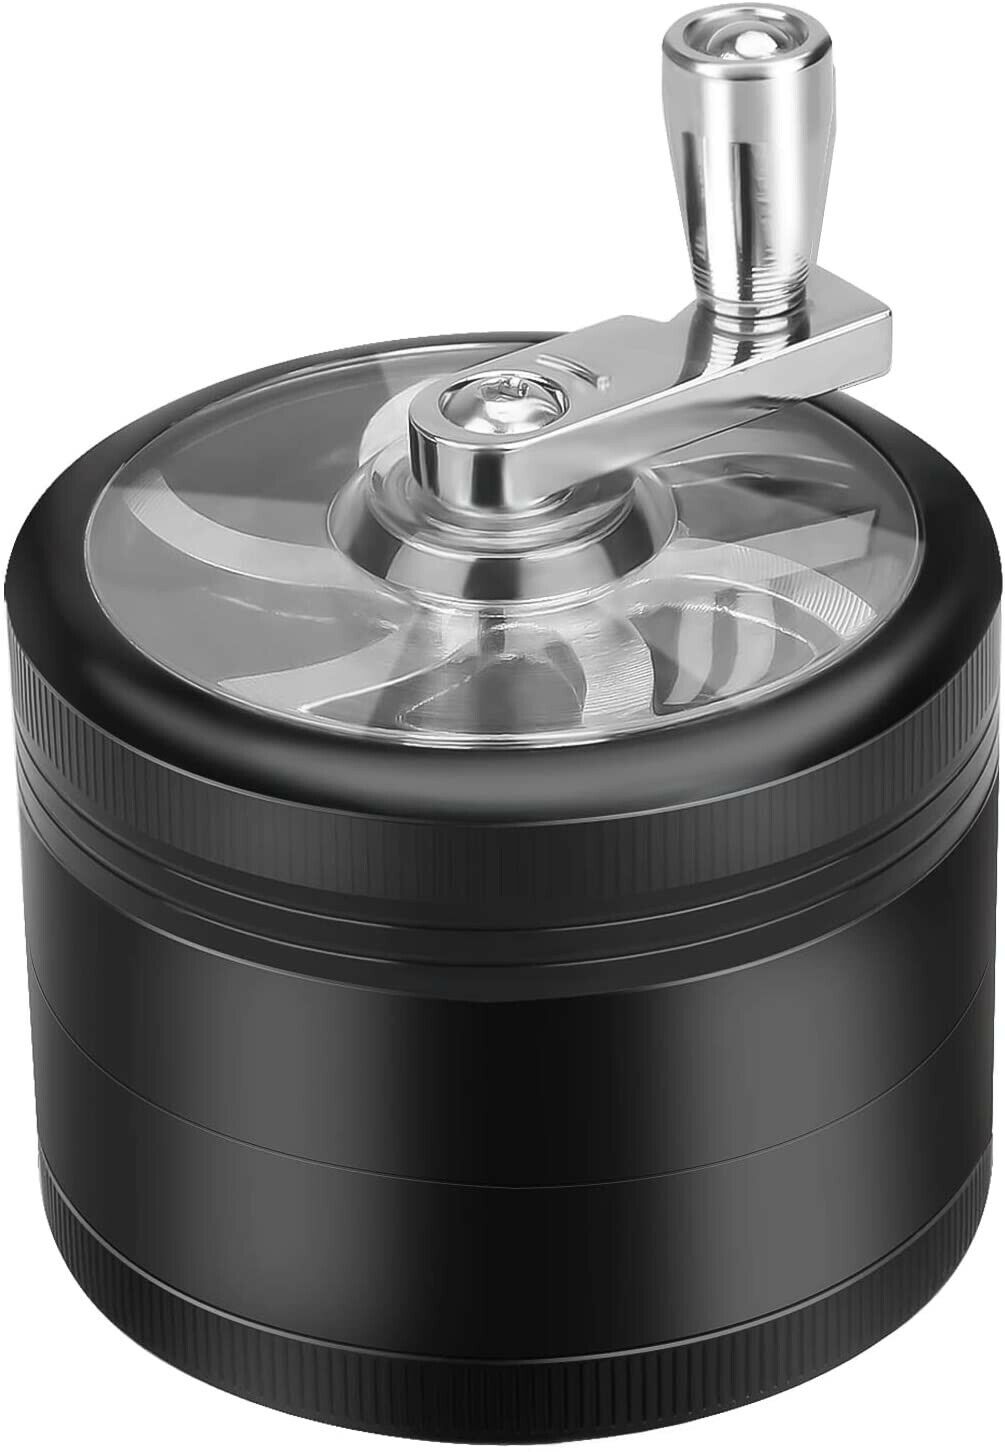 Manual Herb Grinder, 2.5 inch 4 Layers Spice Grinder with Handle